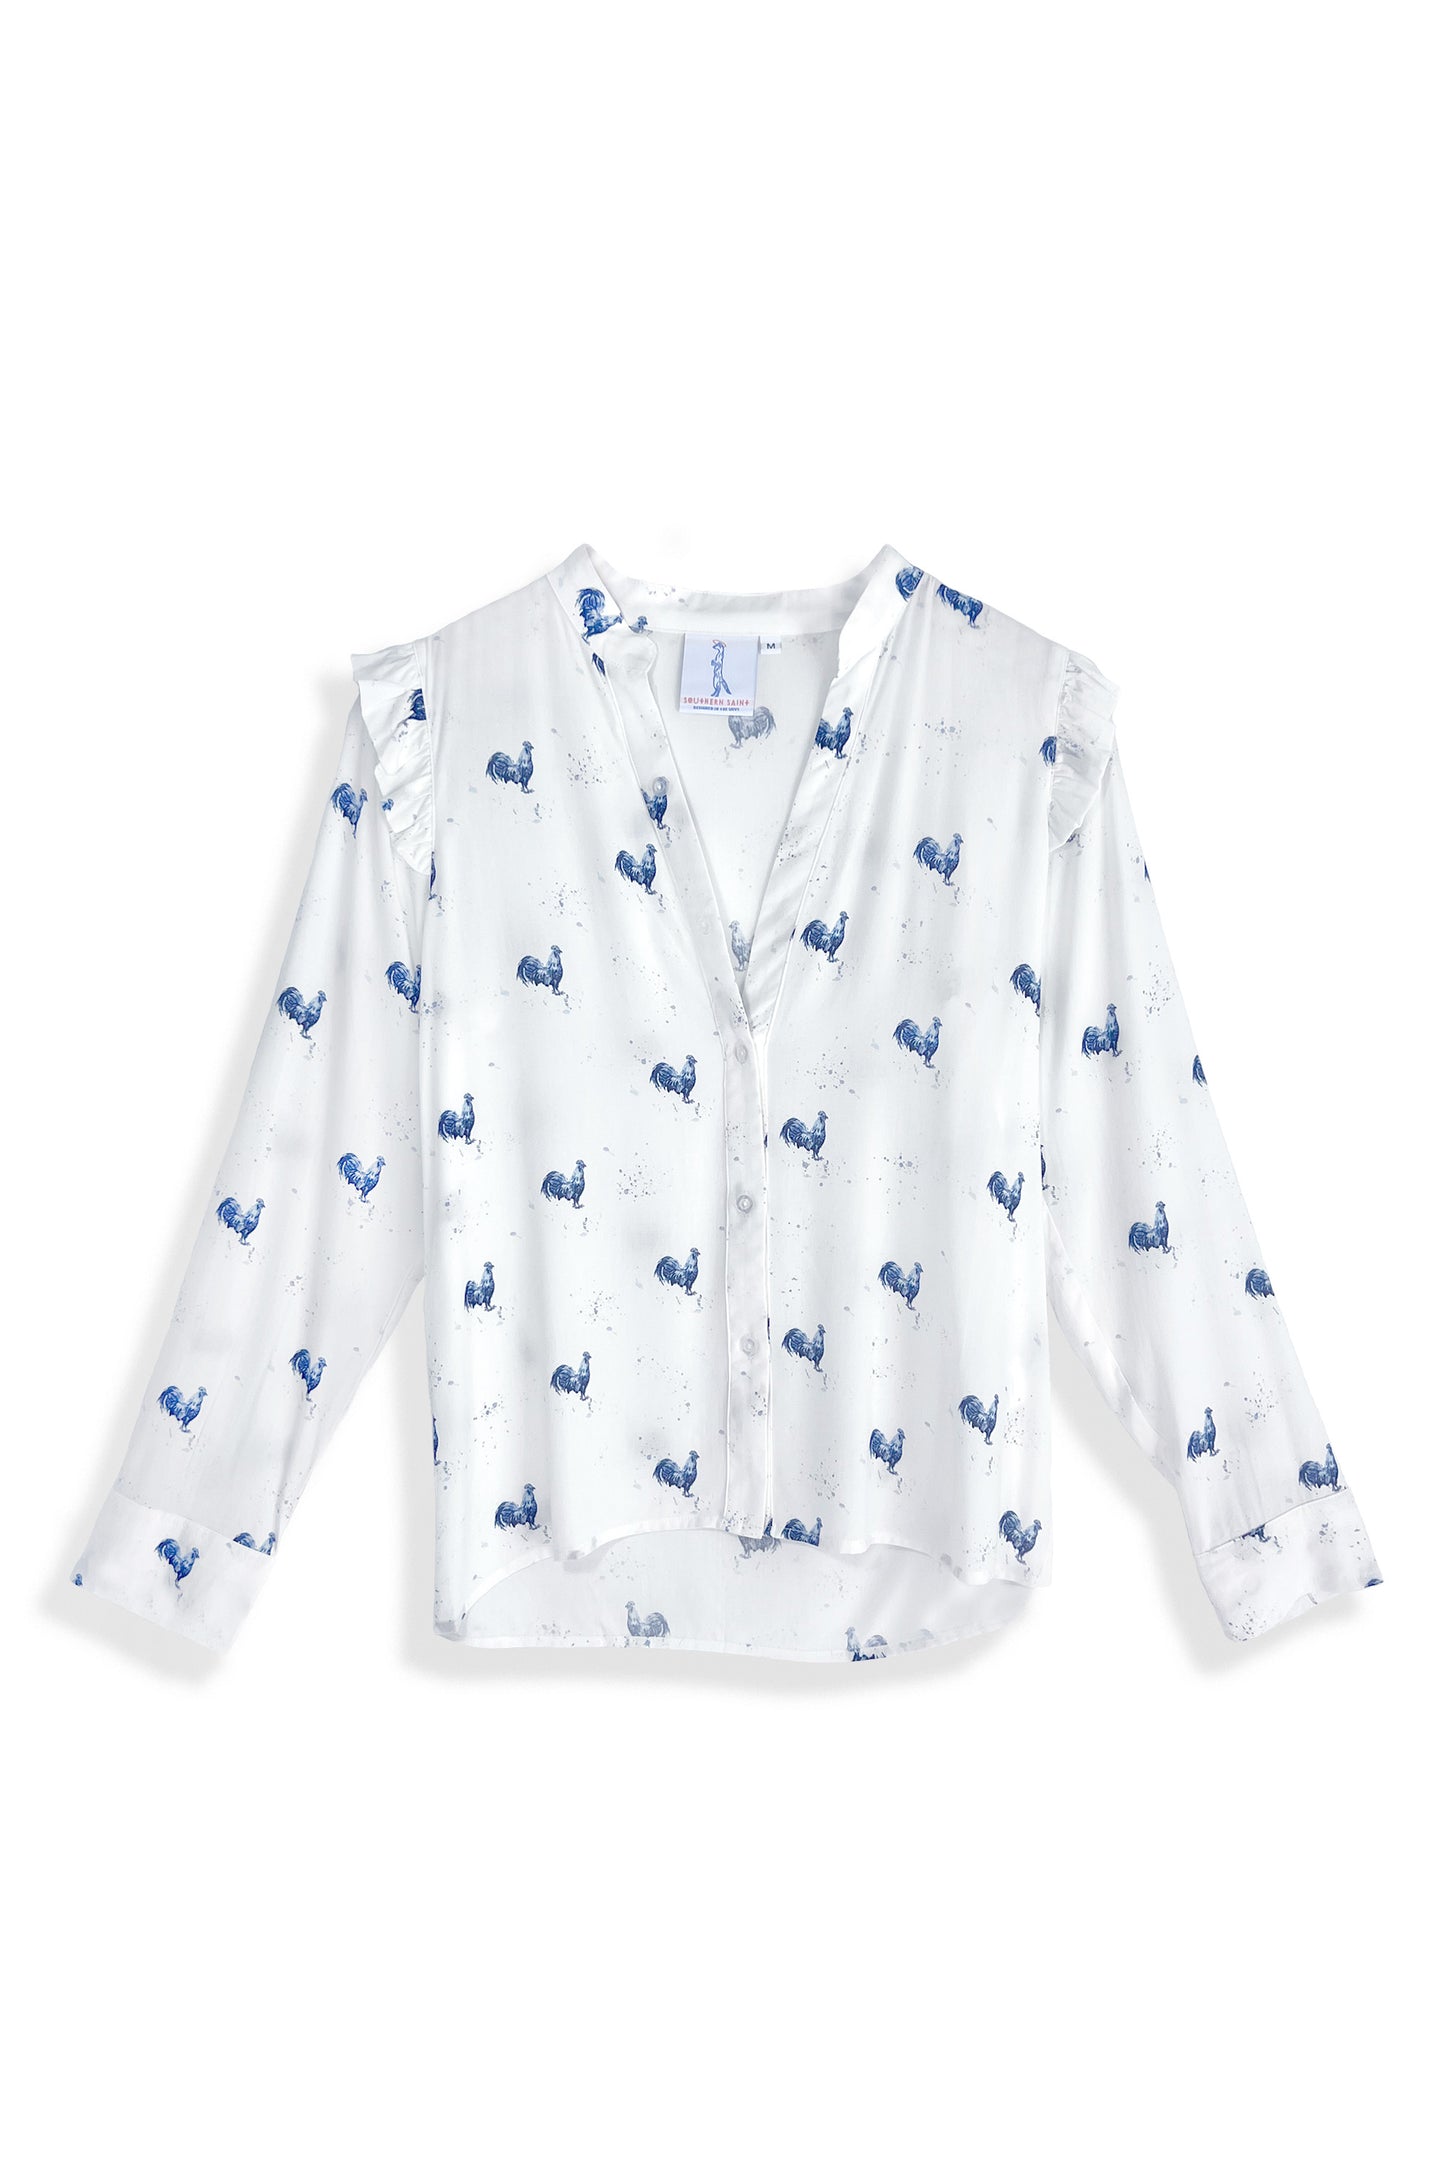 Women's Rooster Ruffle Button-up Top